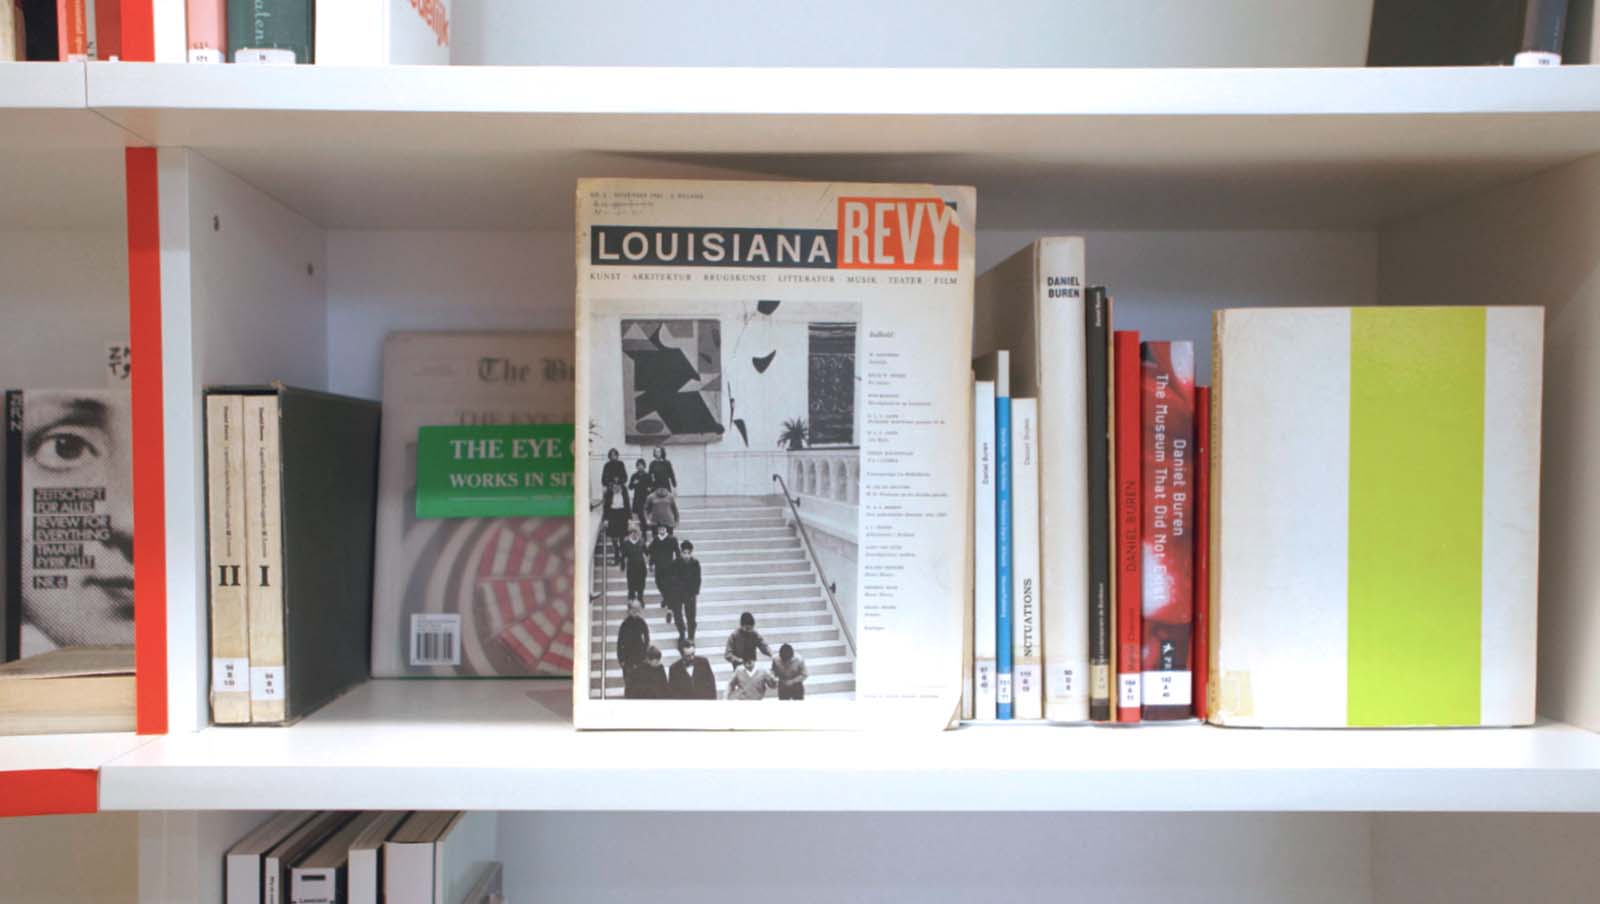 Fig. 9: Shelf dedicated to the monumental staircase of the museum, showing the cover of Museums by Artists, depicting Daniel Buren’s iconic vertical stripes. Moving Thinking, 2015. Photo: Fabian Landewee